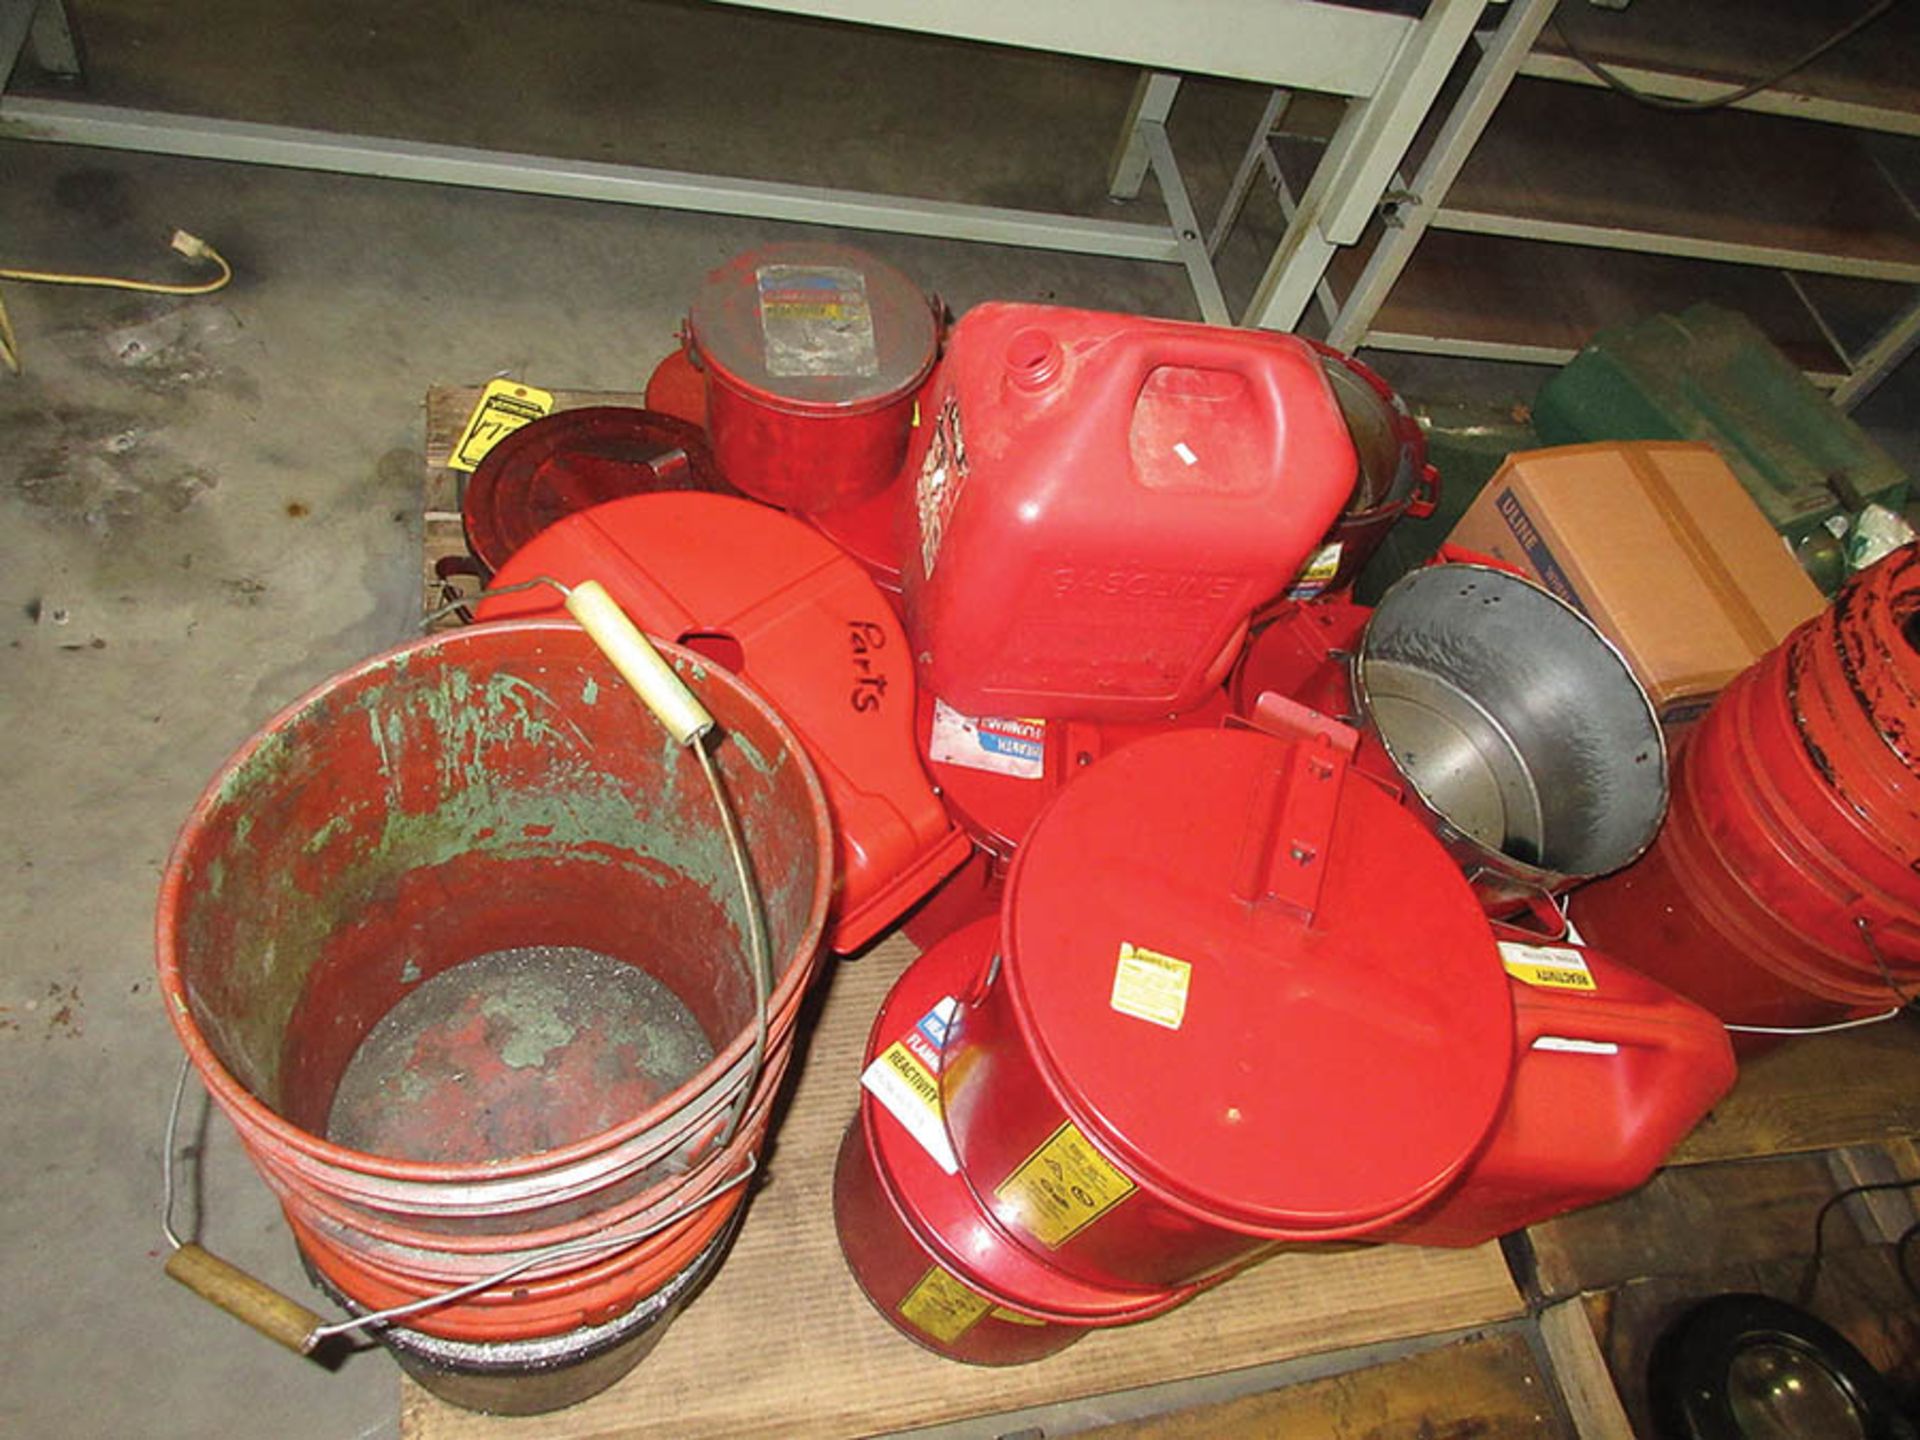 OIL WASTE CANS, GAS CANS